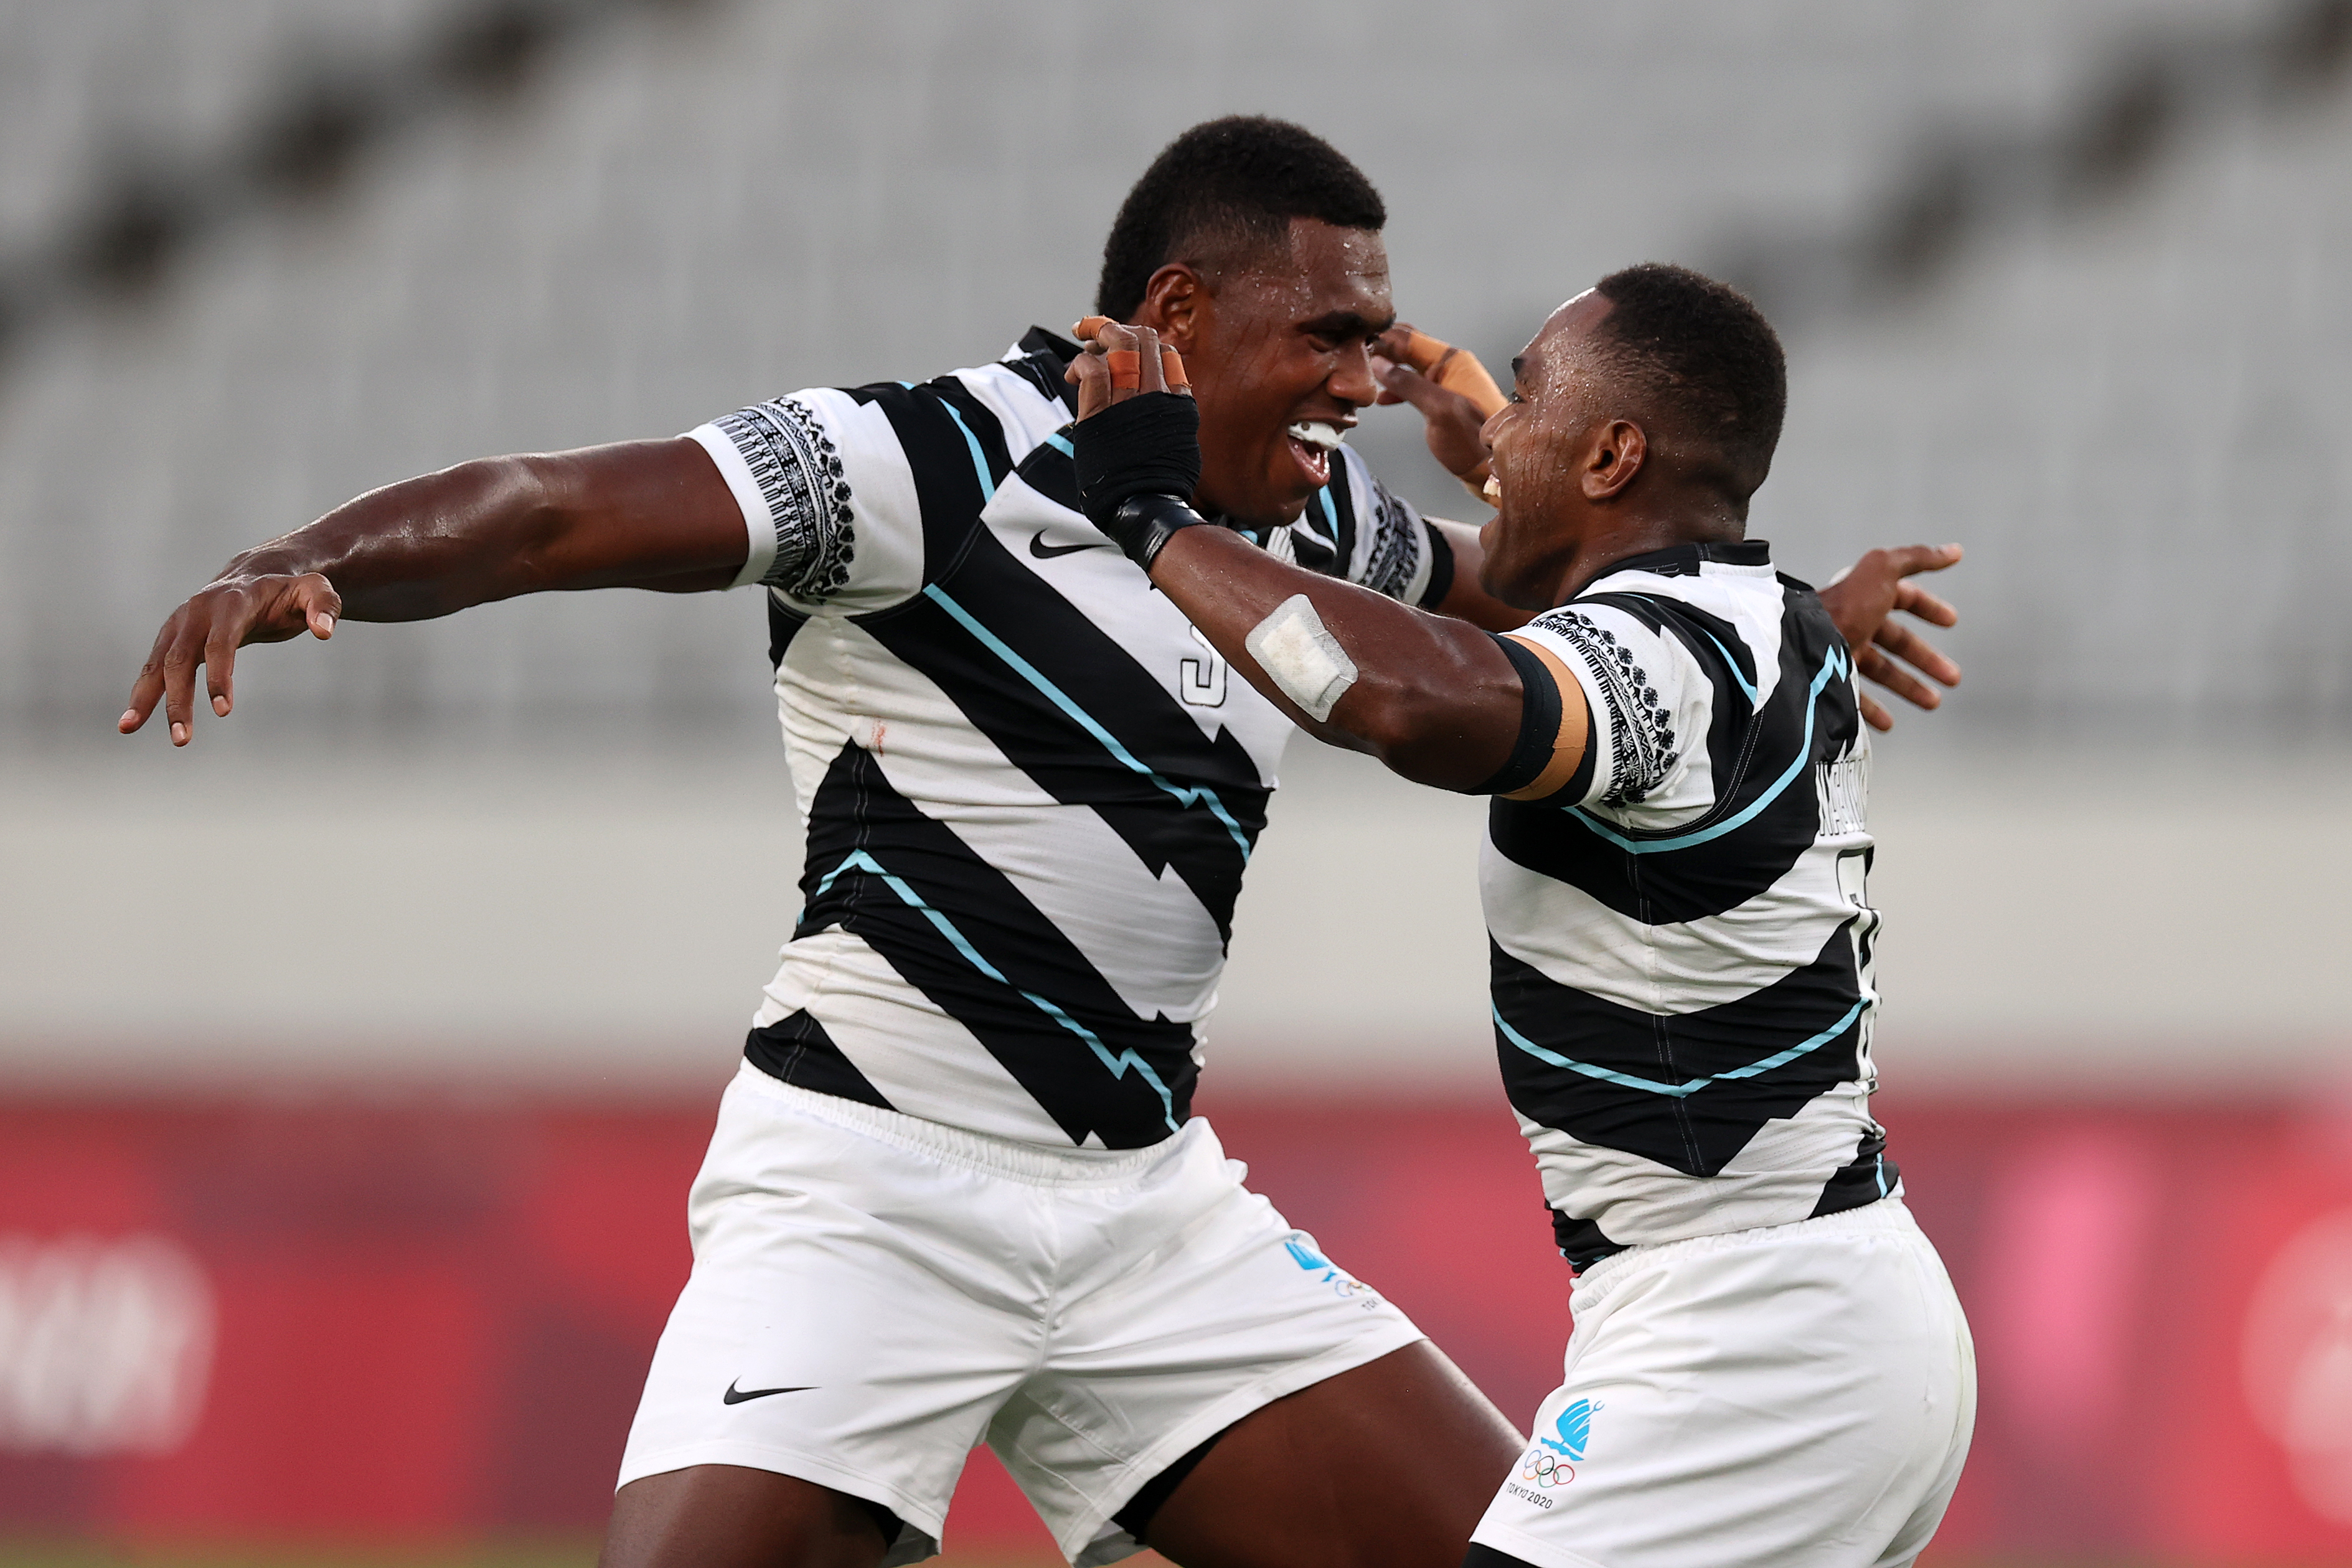 Rugby players Kalione Nasoko, left, and Waisea Nacuqu of Fiji celebrate their victory against New Zealand during the gold medal match on July 28.